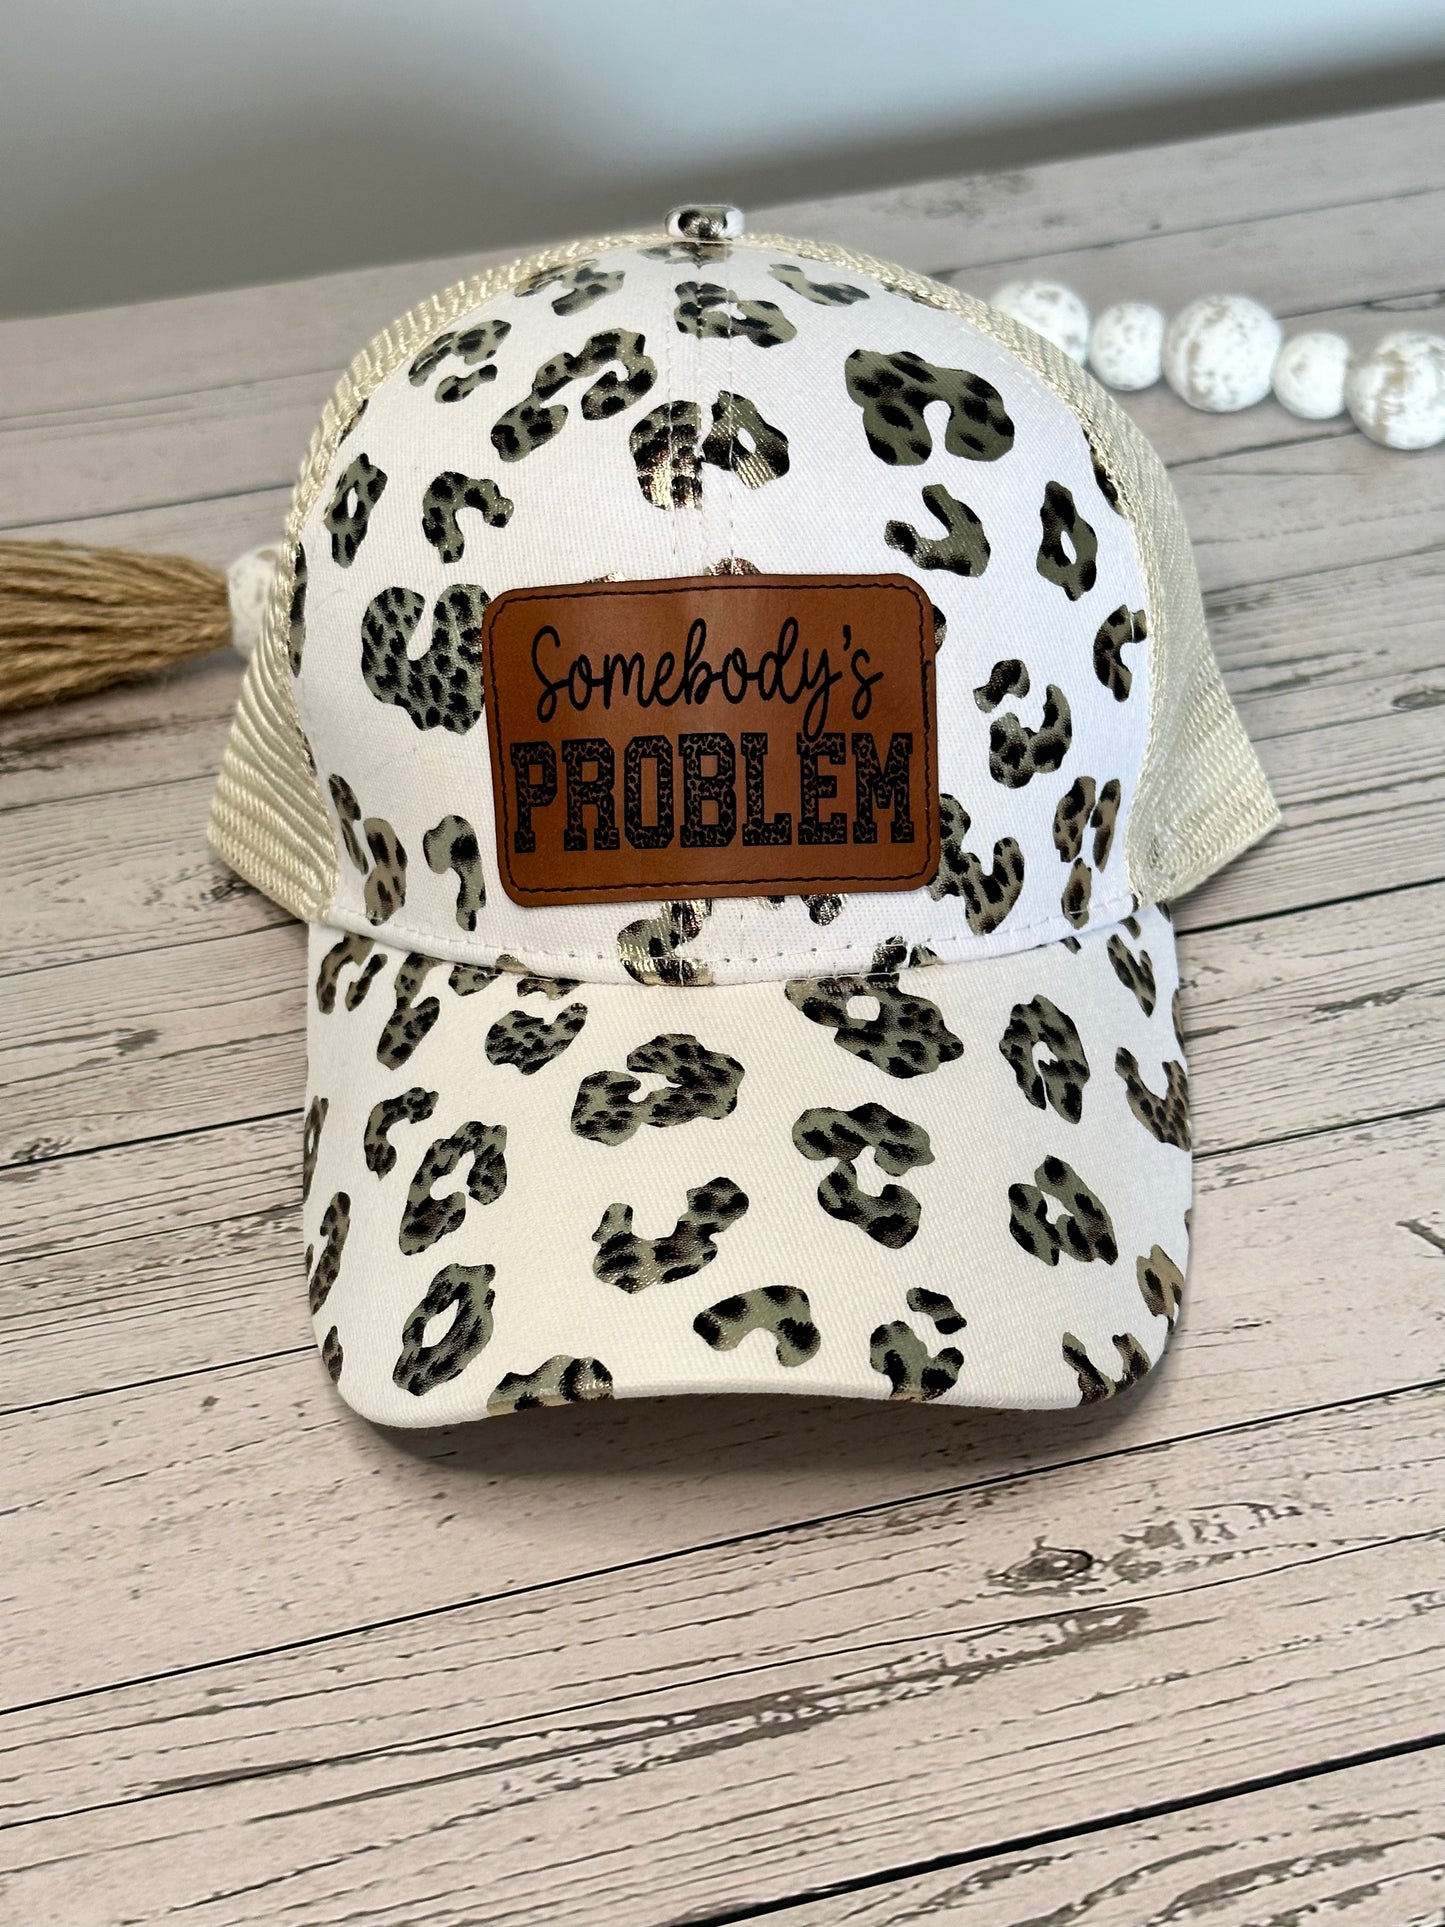 Leopard Ponytail Patch Hats - Willow Love Bug Designs 